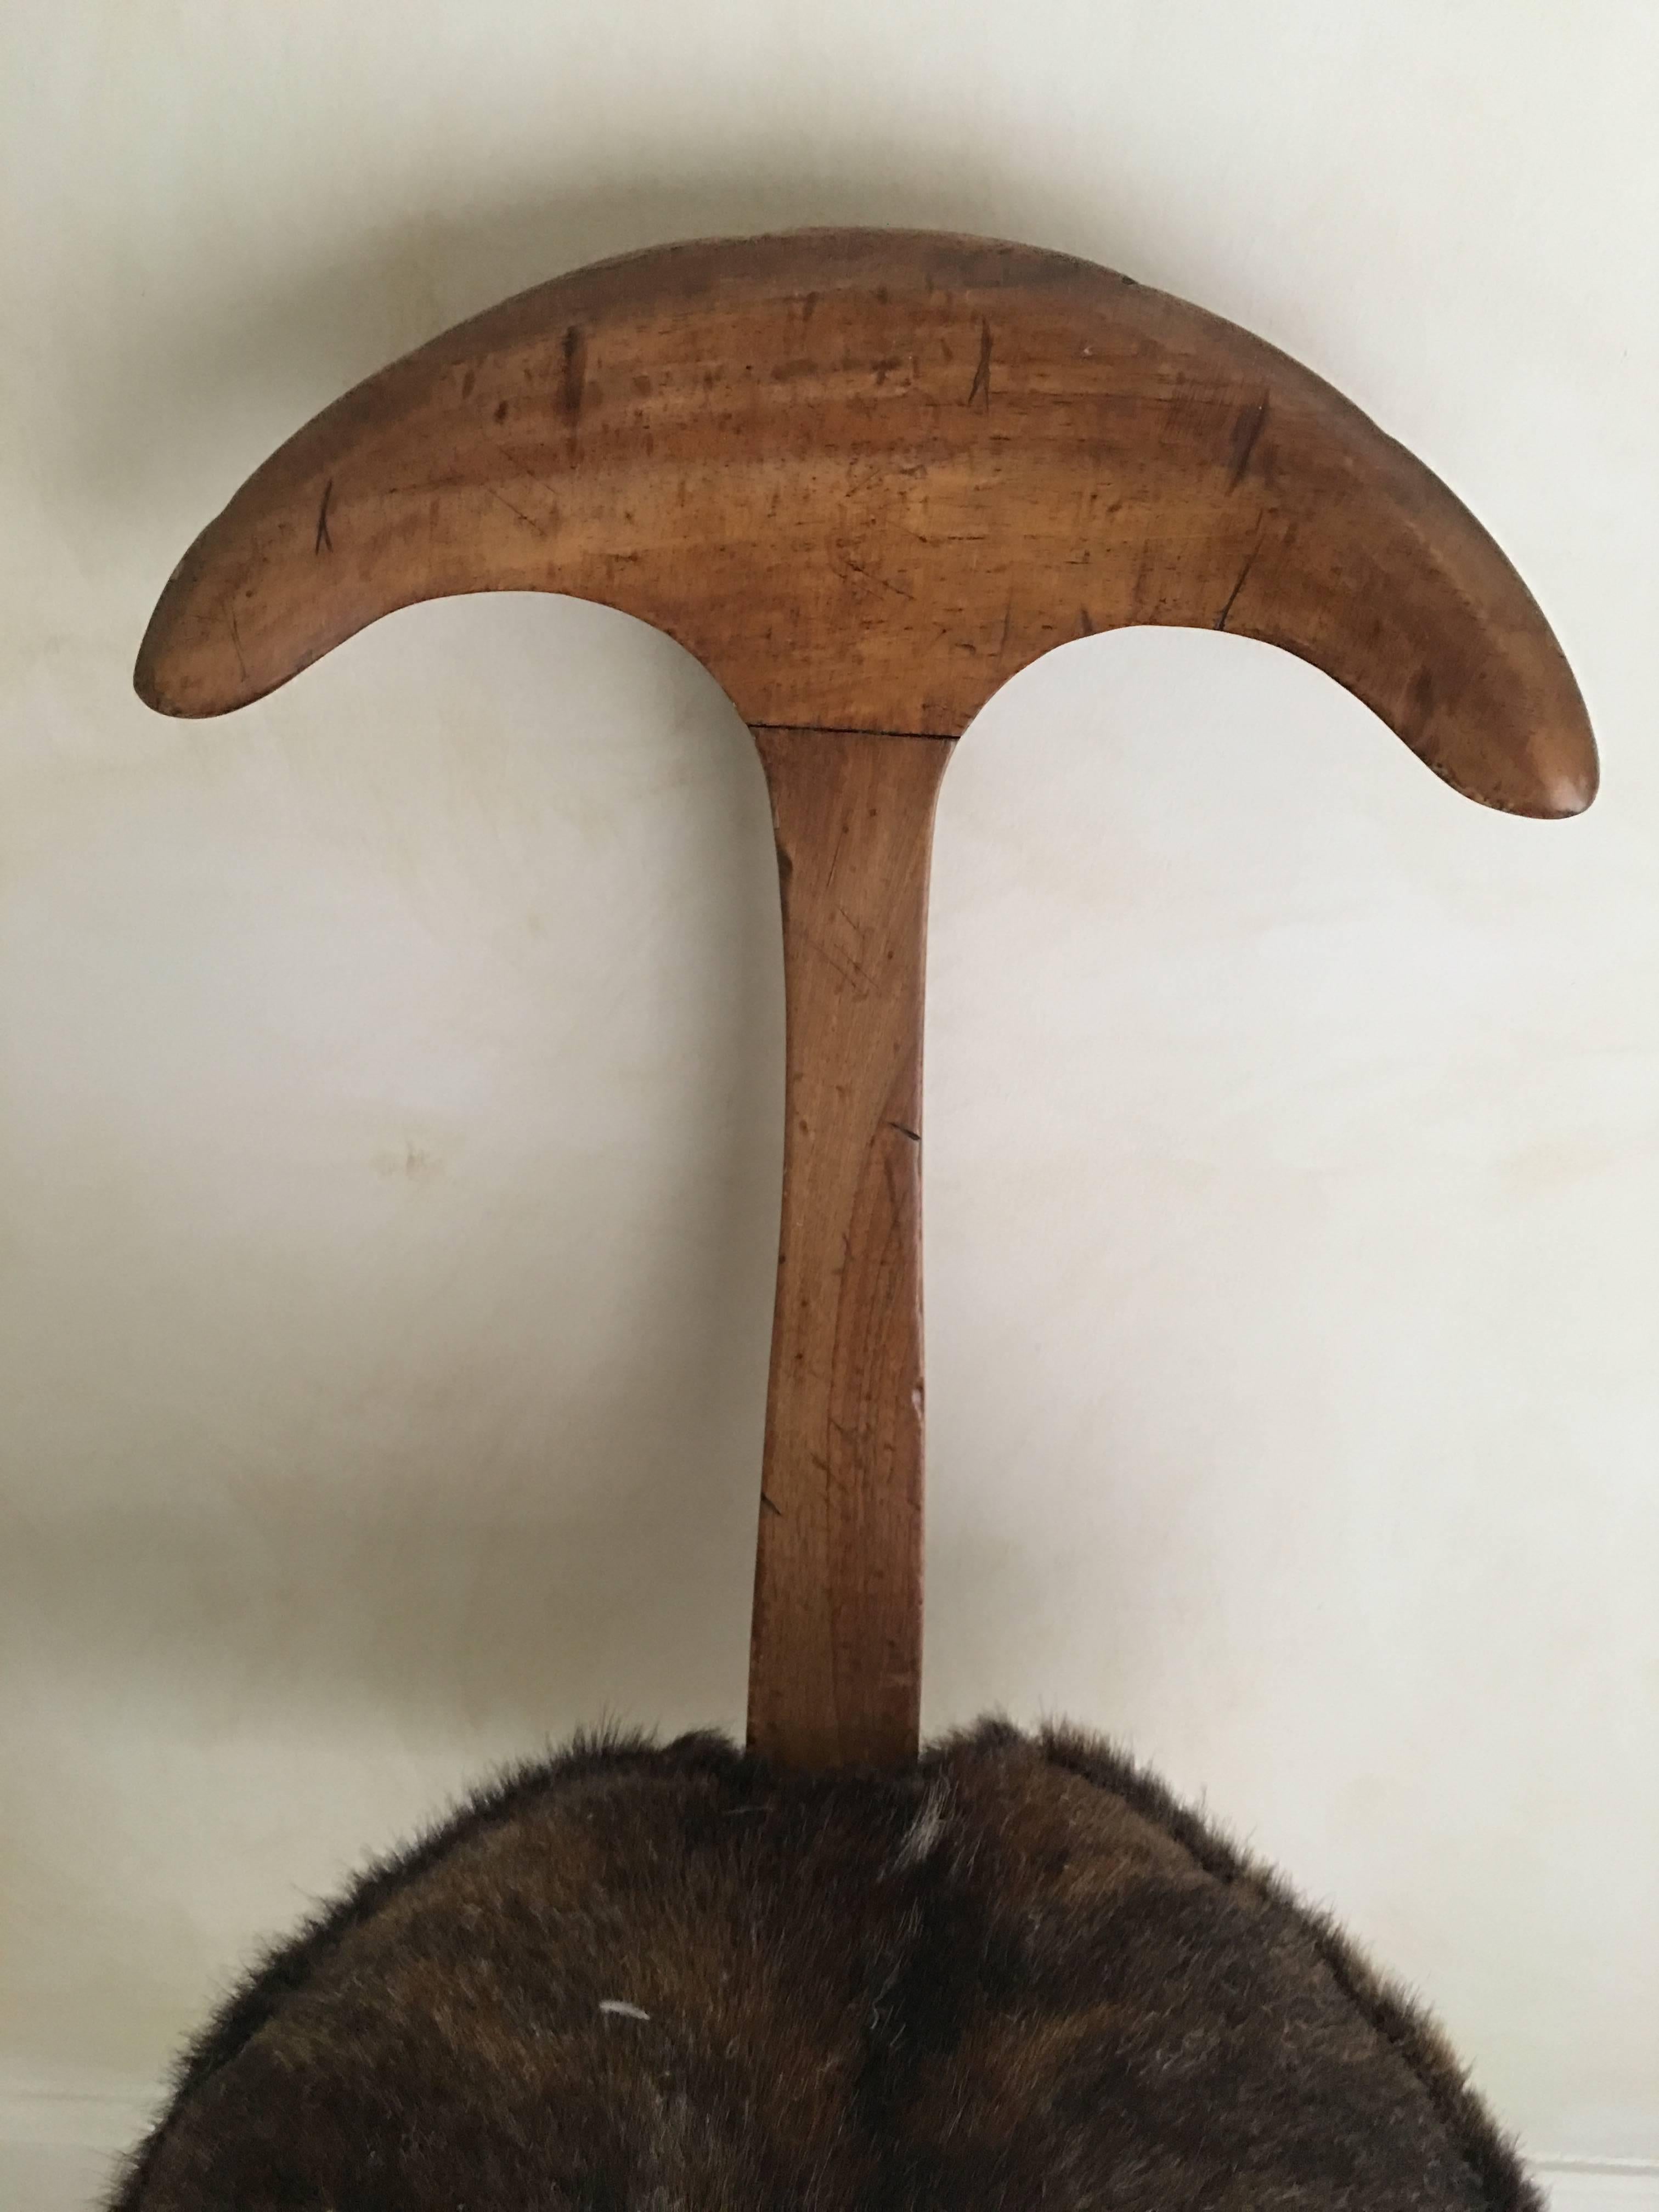 A very rare and unique piece, this tri-leg decorative chair is very much in the style of Gio Ponti and is from Italy. A fabulous accent piece. Could be used as a hall chair or a stool. Made of walnut that shows natural marks and cow hide seat edged